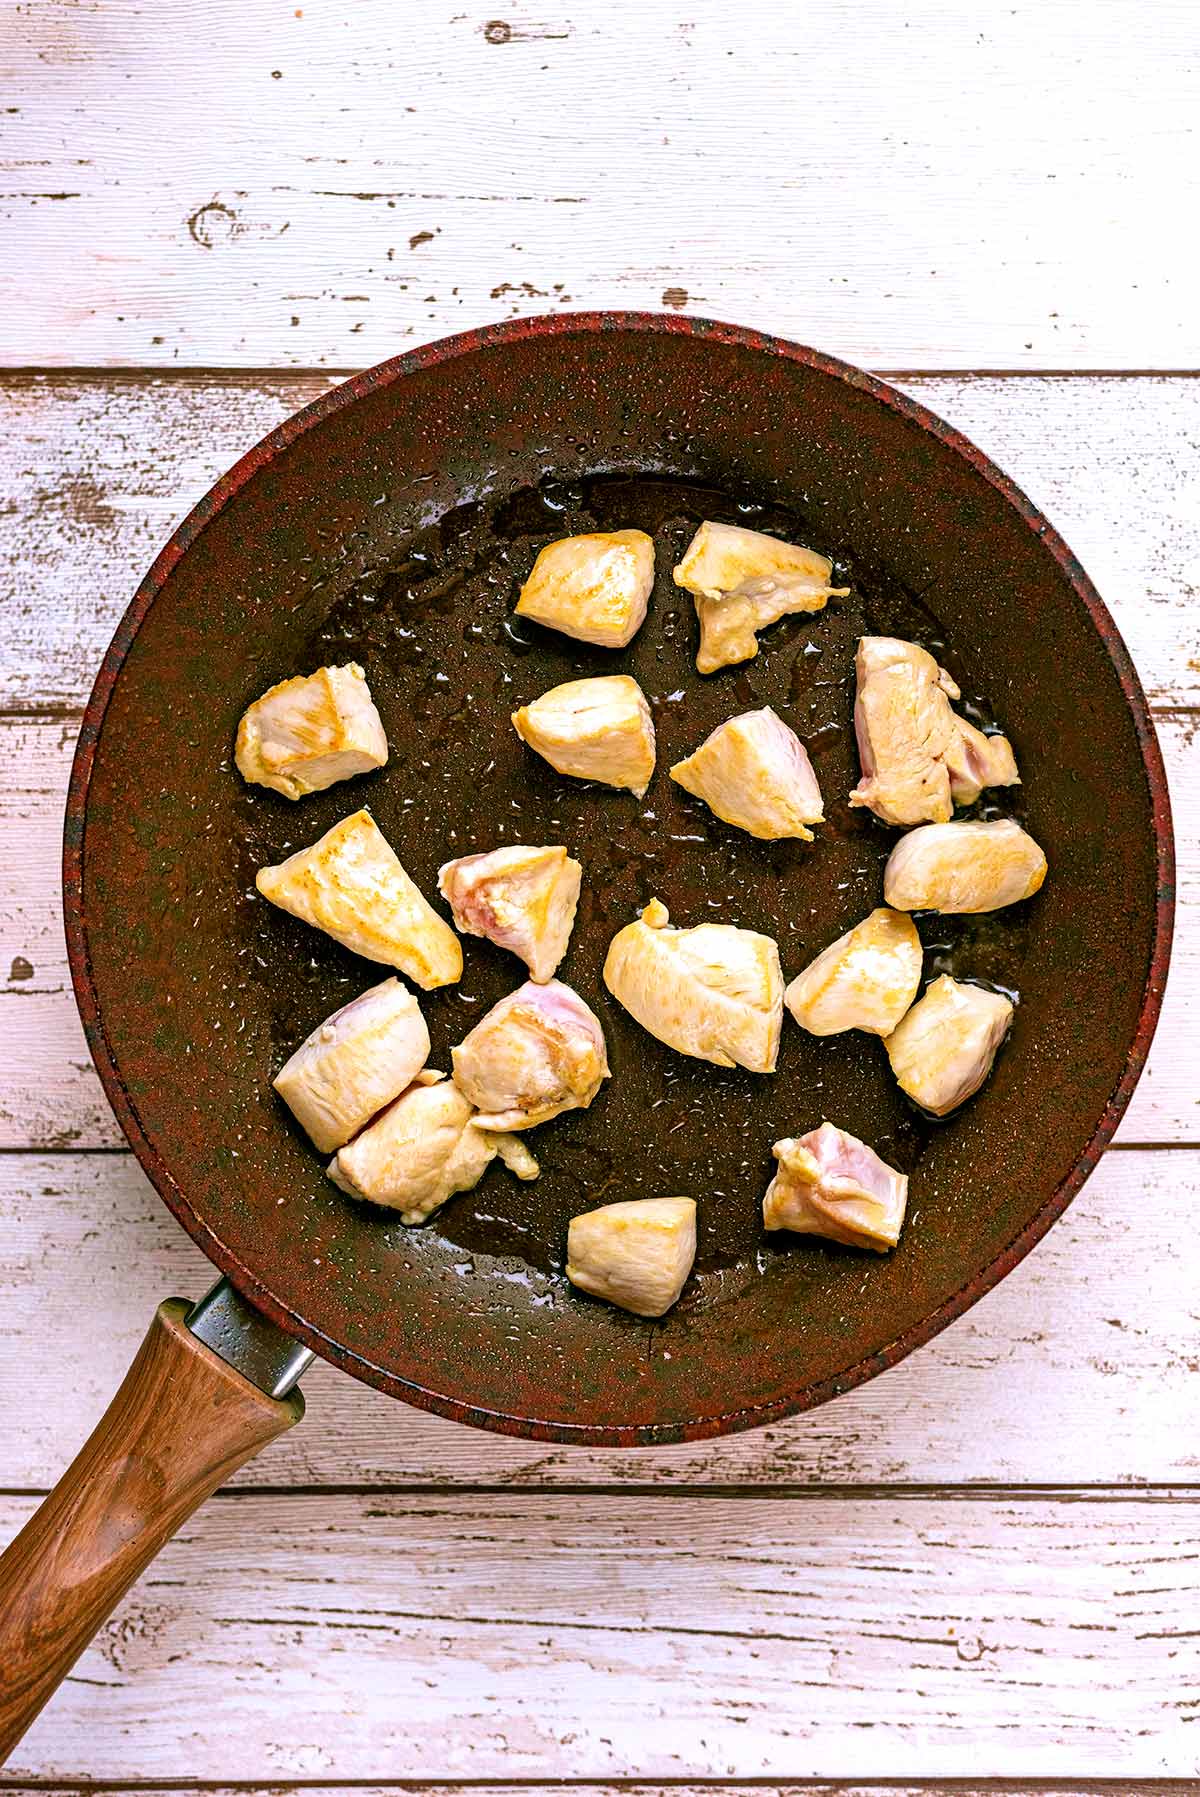 Chunks of chicken cooking in a frying pan.